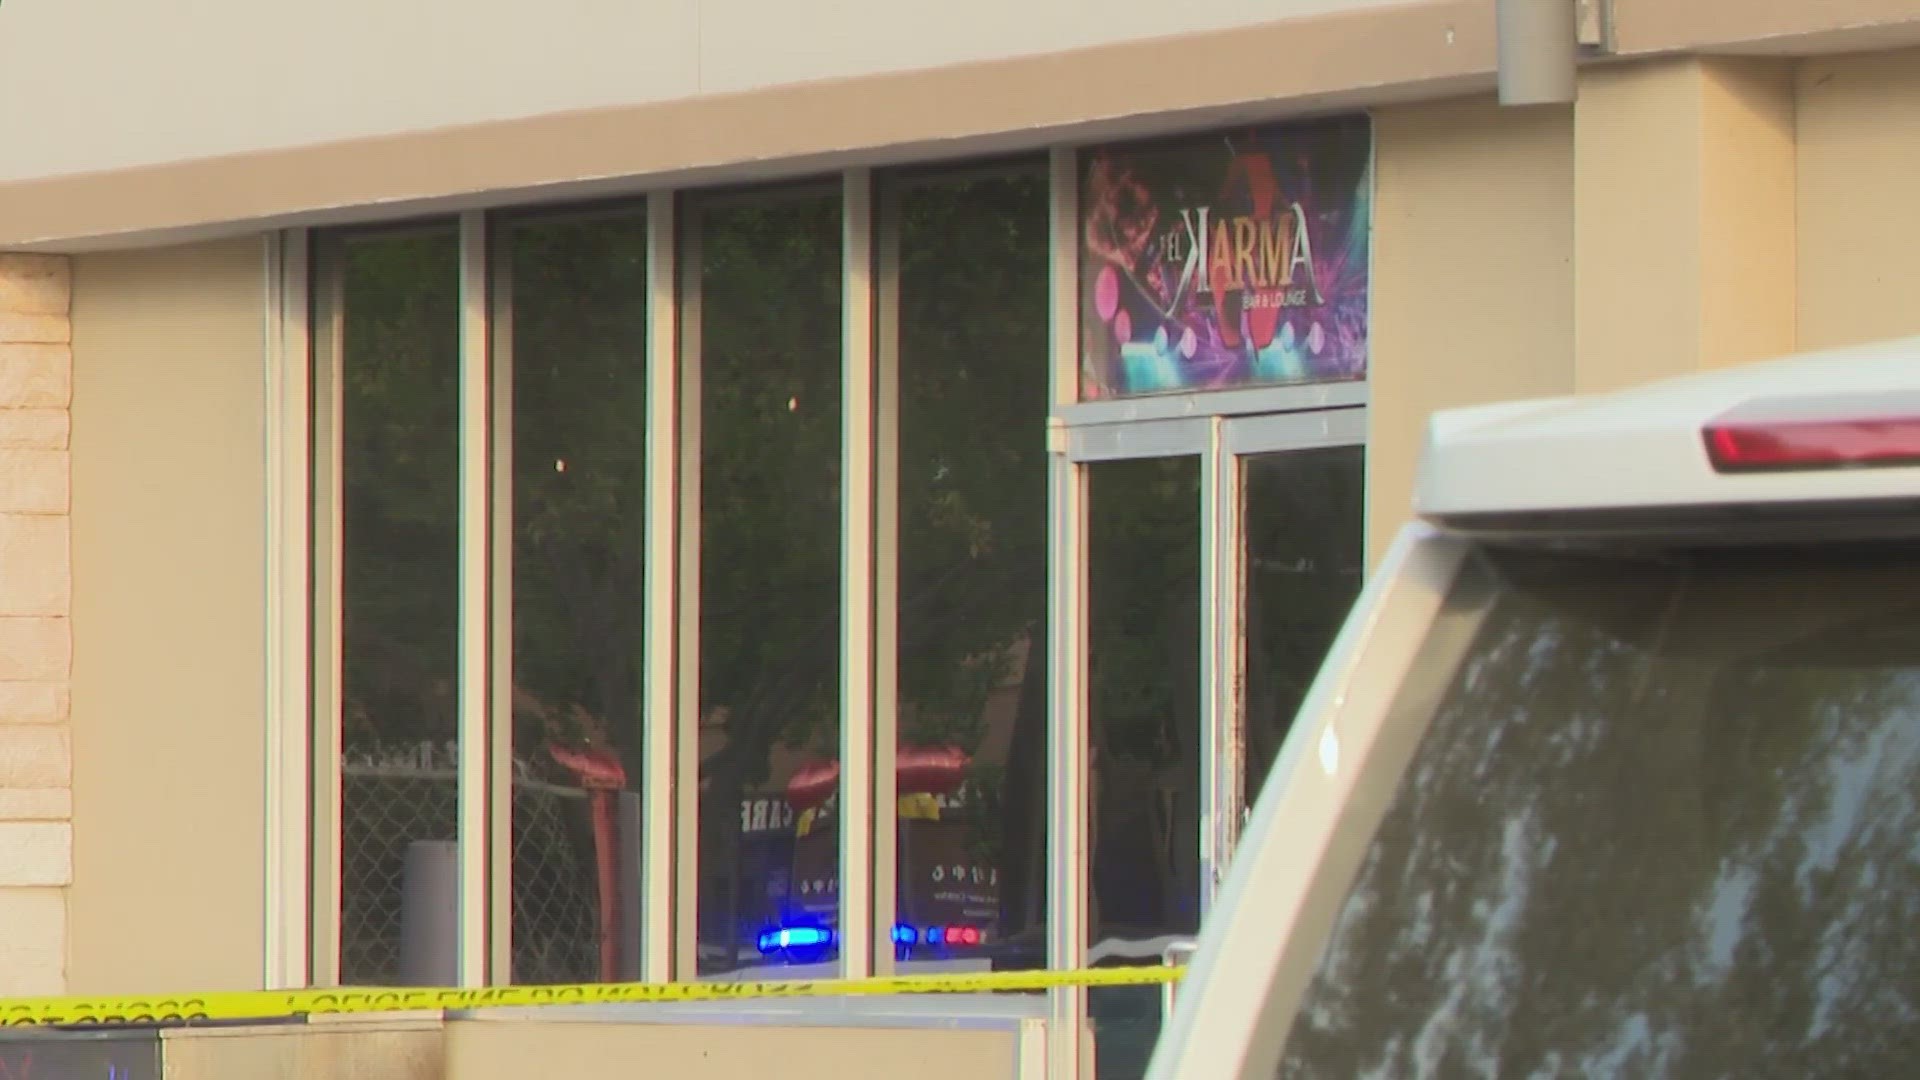 Houston police said three security guards were kicking two men out of El Karma Bar & Lounge after an argument inside.